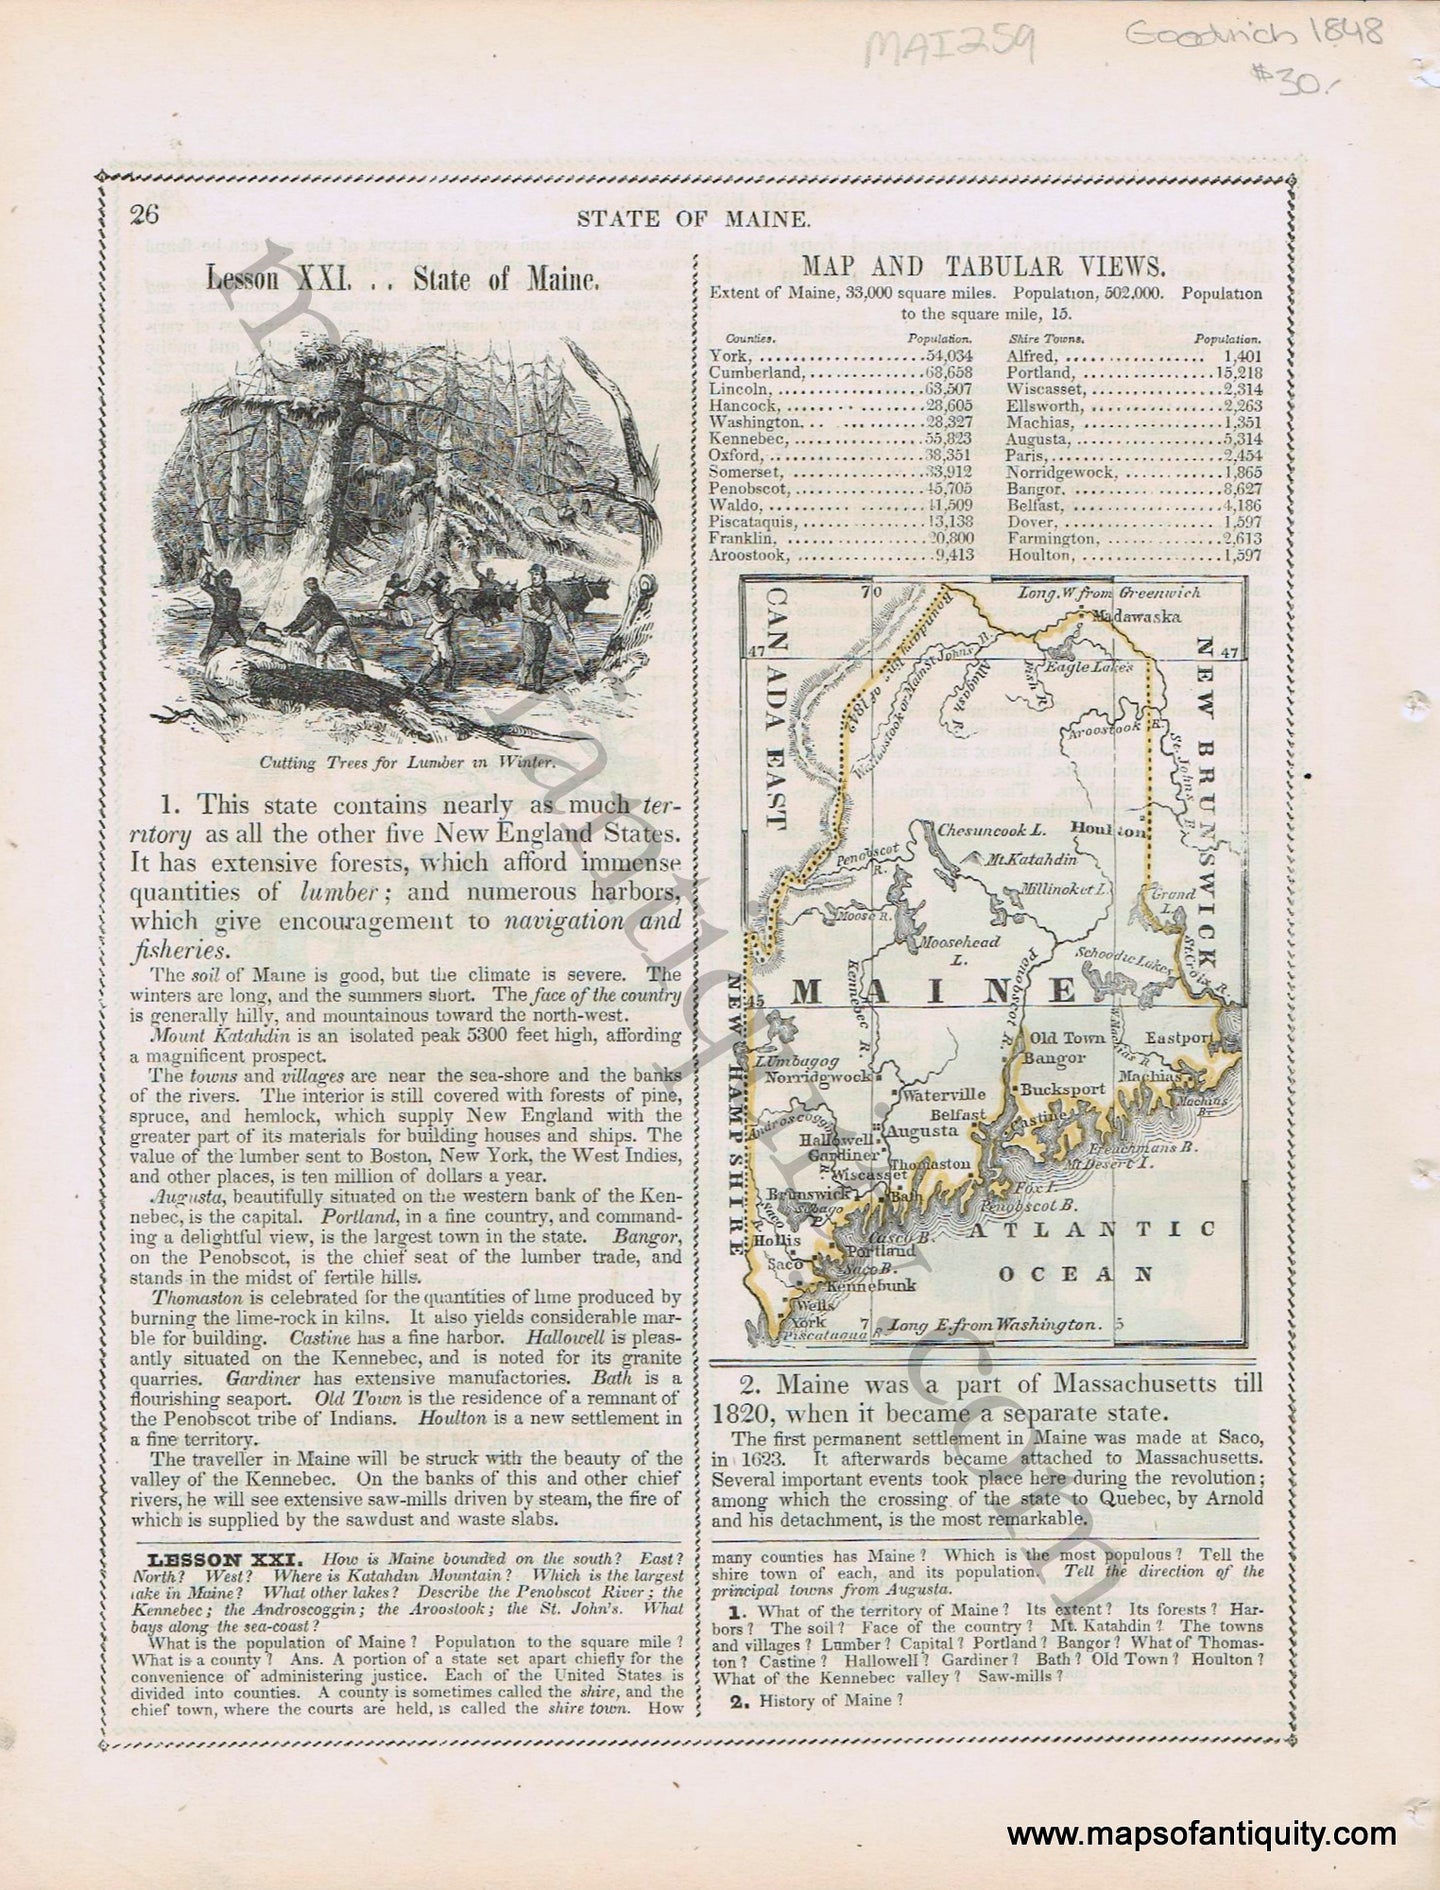 Antique-Printed-Color-Map-State-of-Maine-Verso-New-England-Engravings-1848-Goodrich-United-States-Maine1800s-19th-century-Maps-of-Antiquity